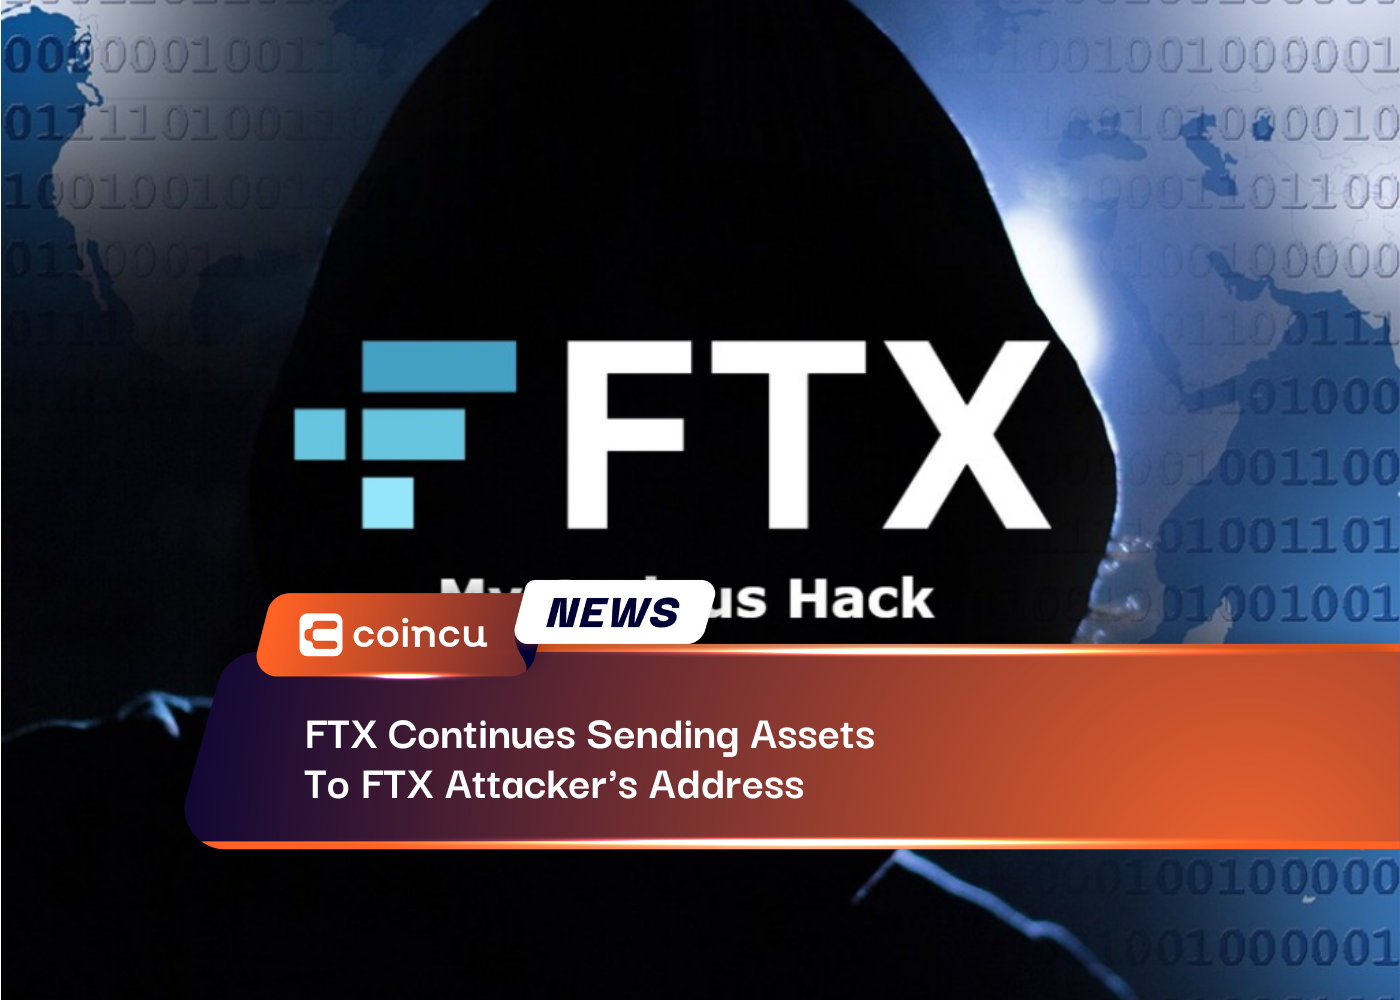 FTX Continues Sending Assets To FTX Attacker's Address